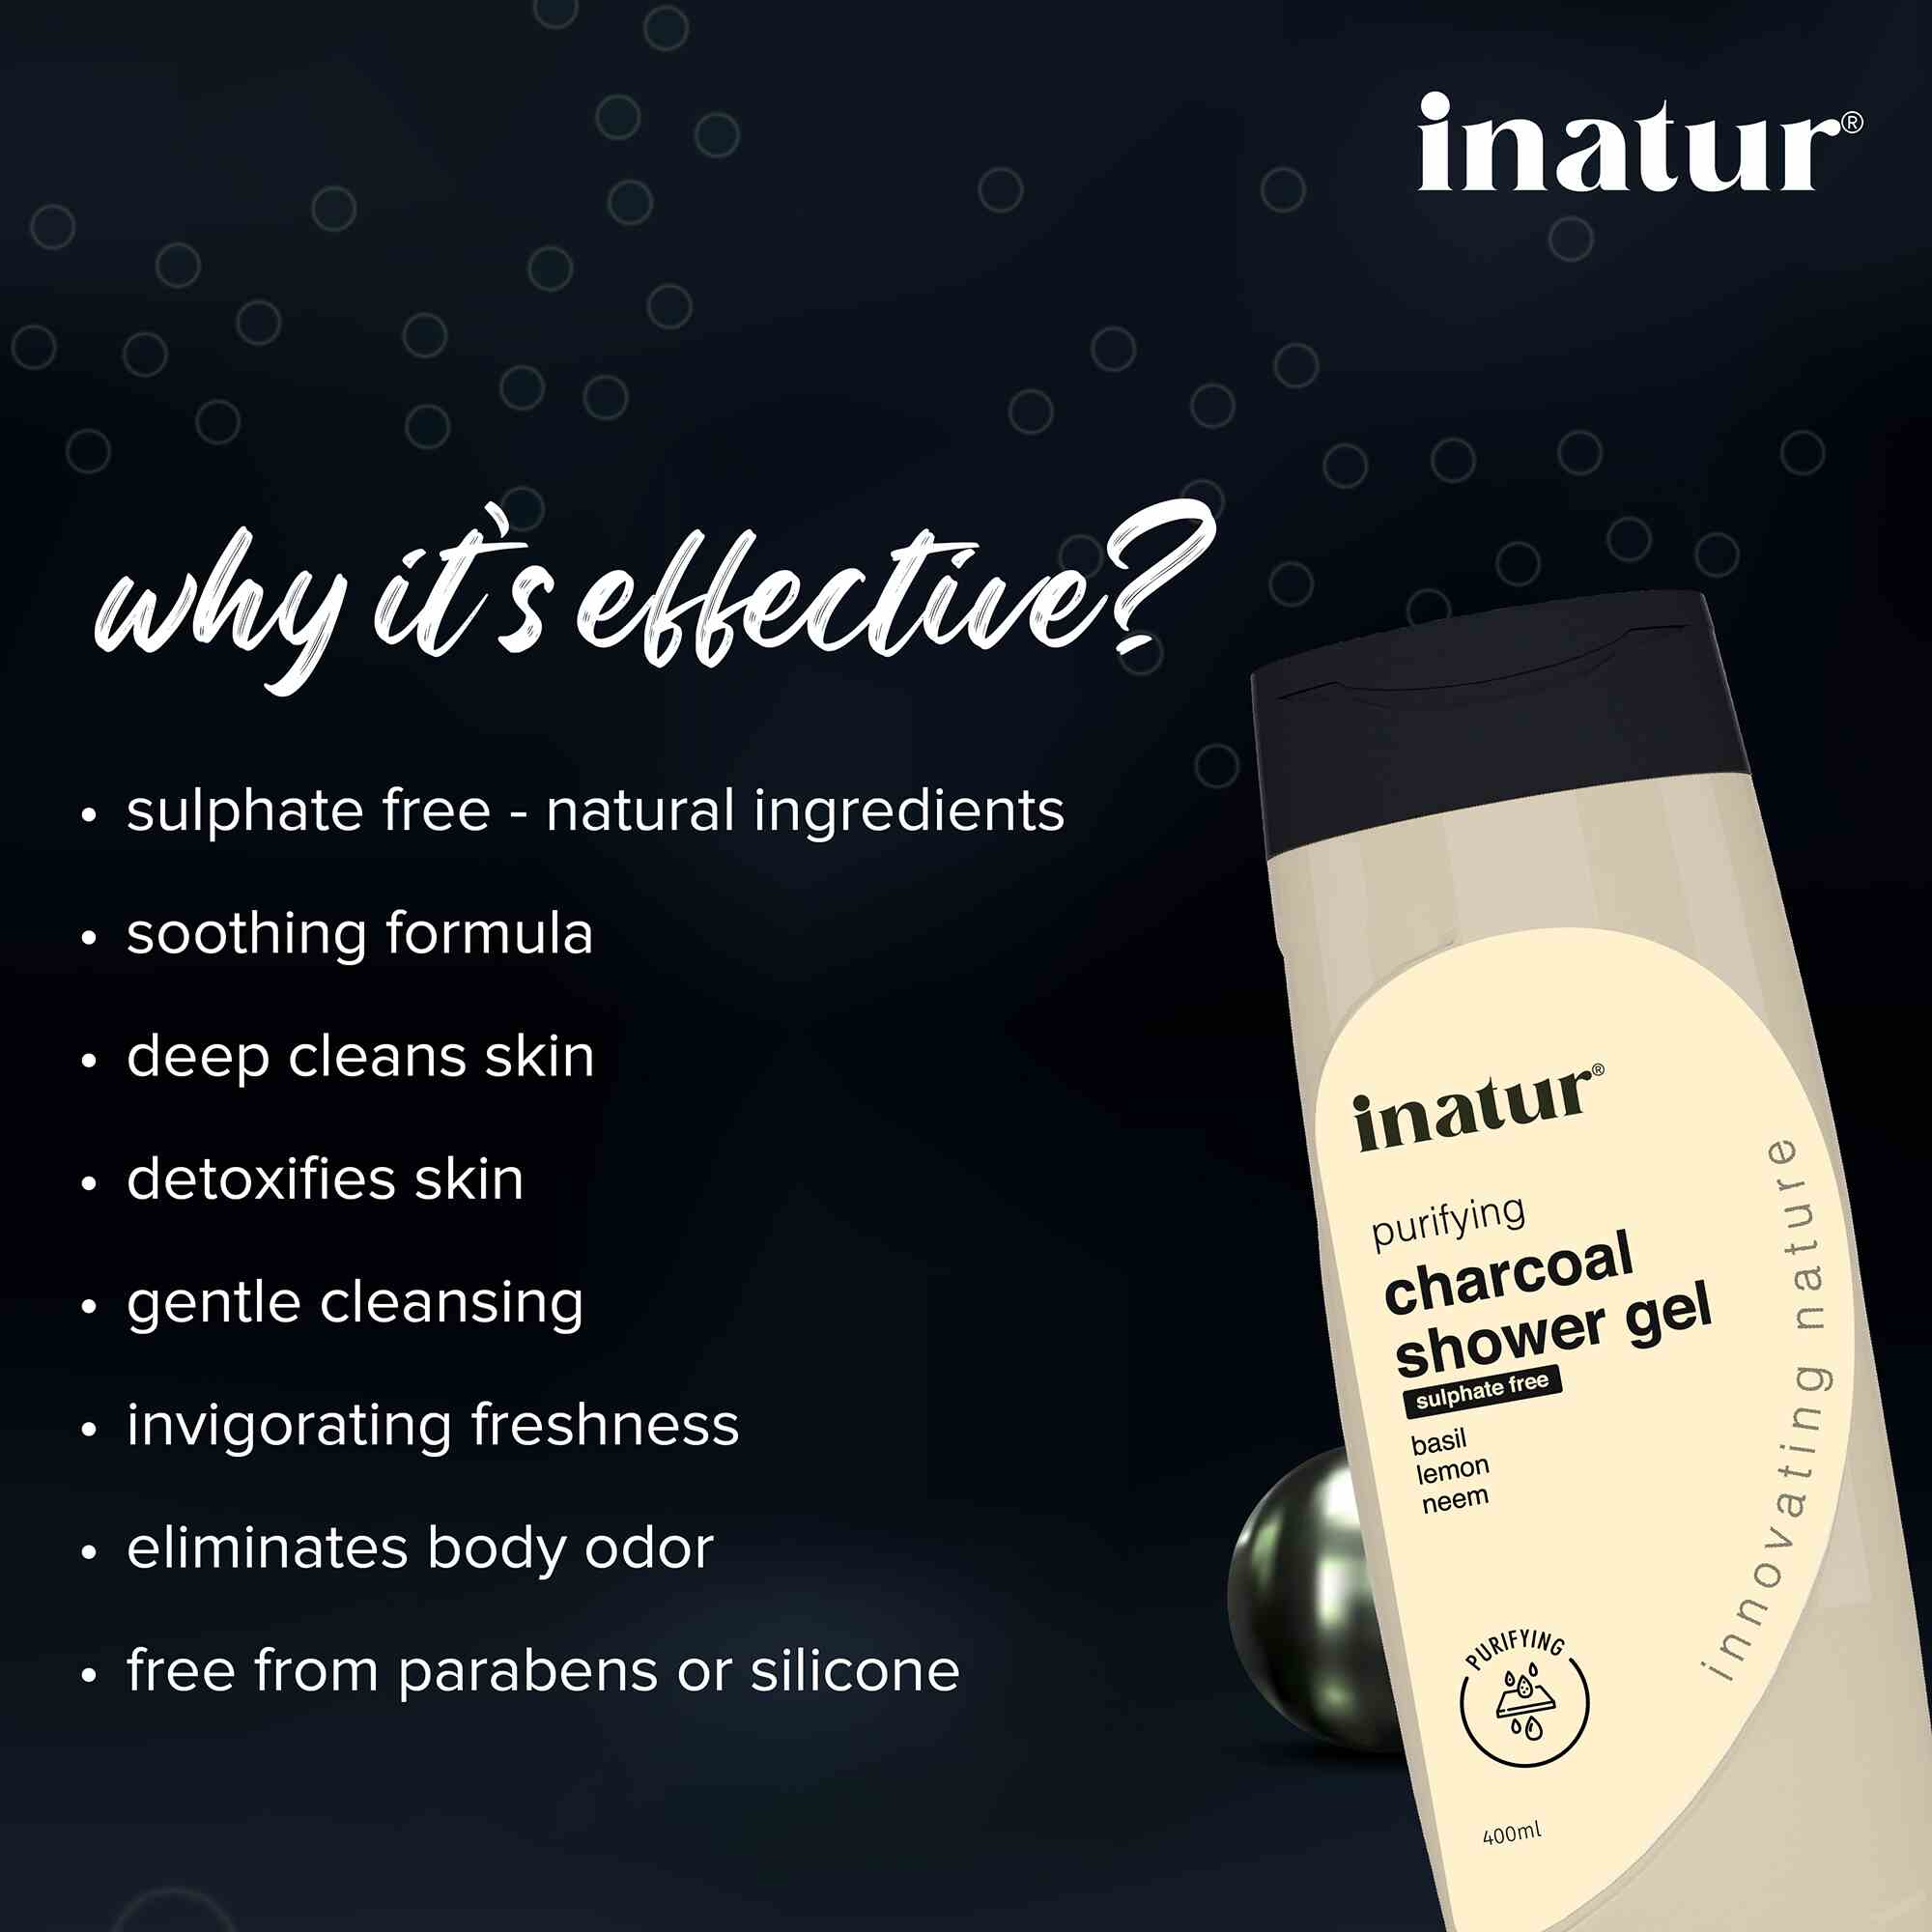 why inatur charcoal shower gel is effective